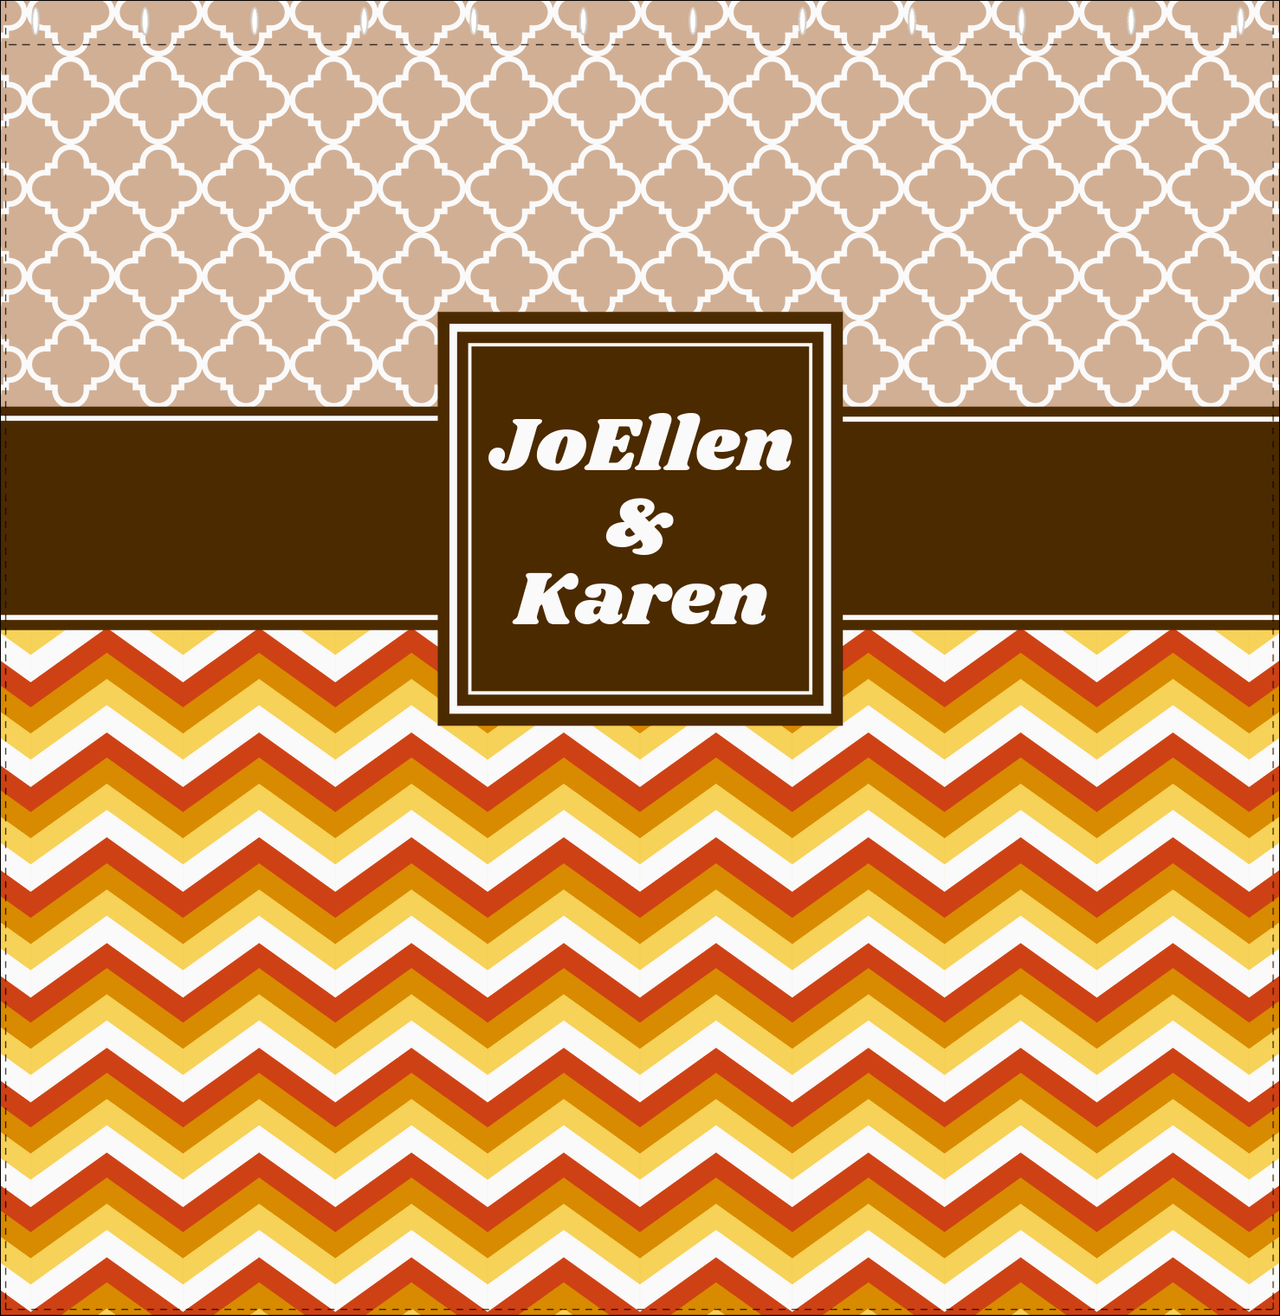 Personalized Quatrefoil and Chevron IV Shower Curtain - Brown and Orange - Square Nameplate - Decorate View